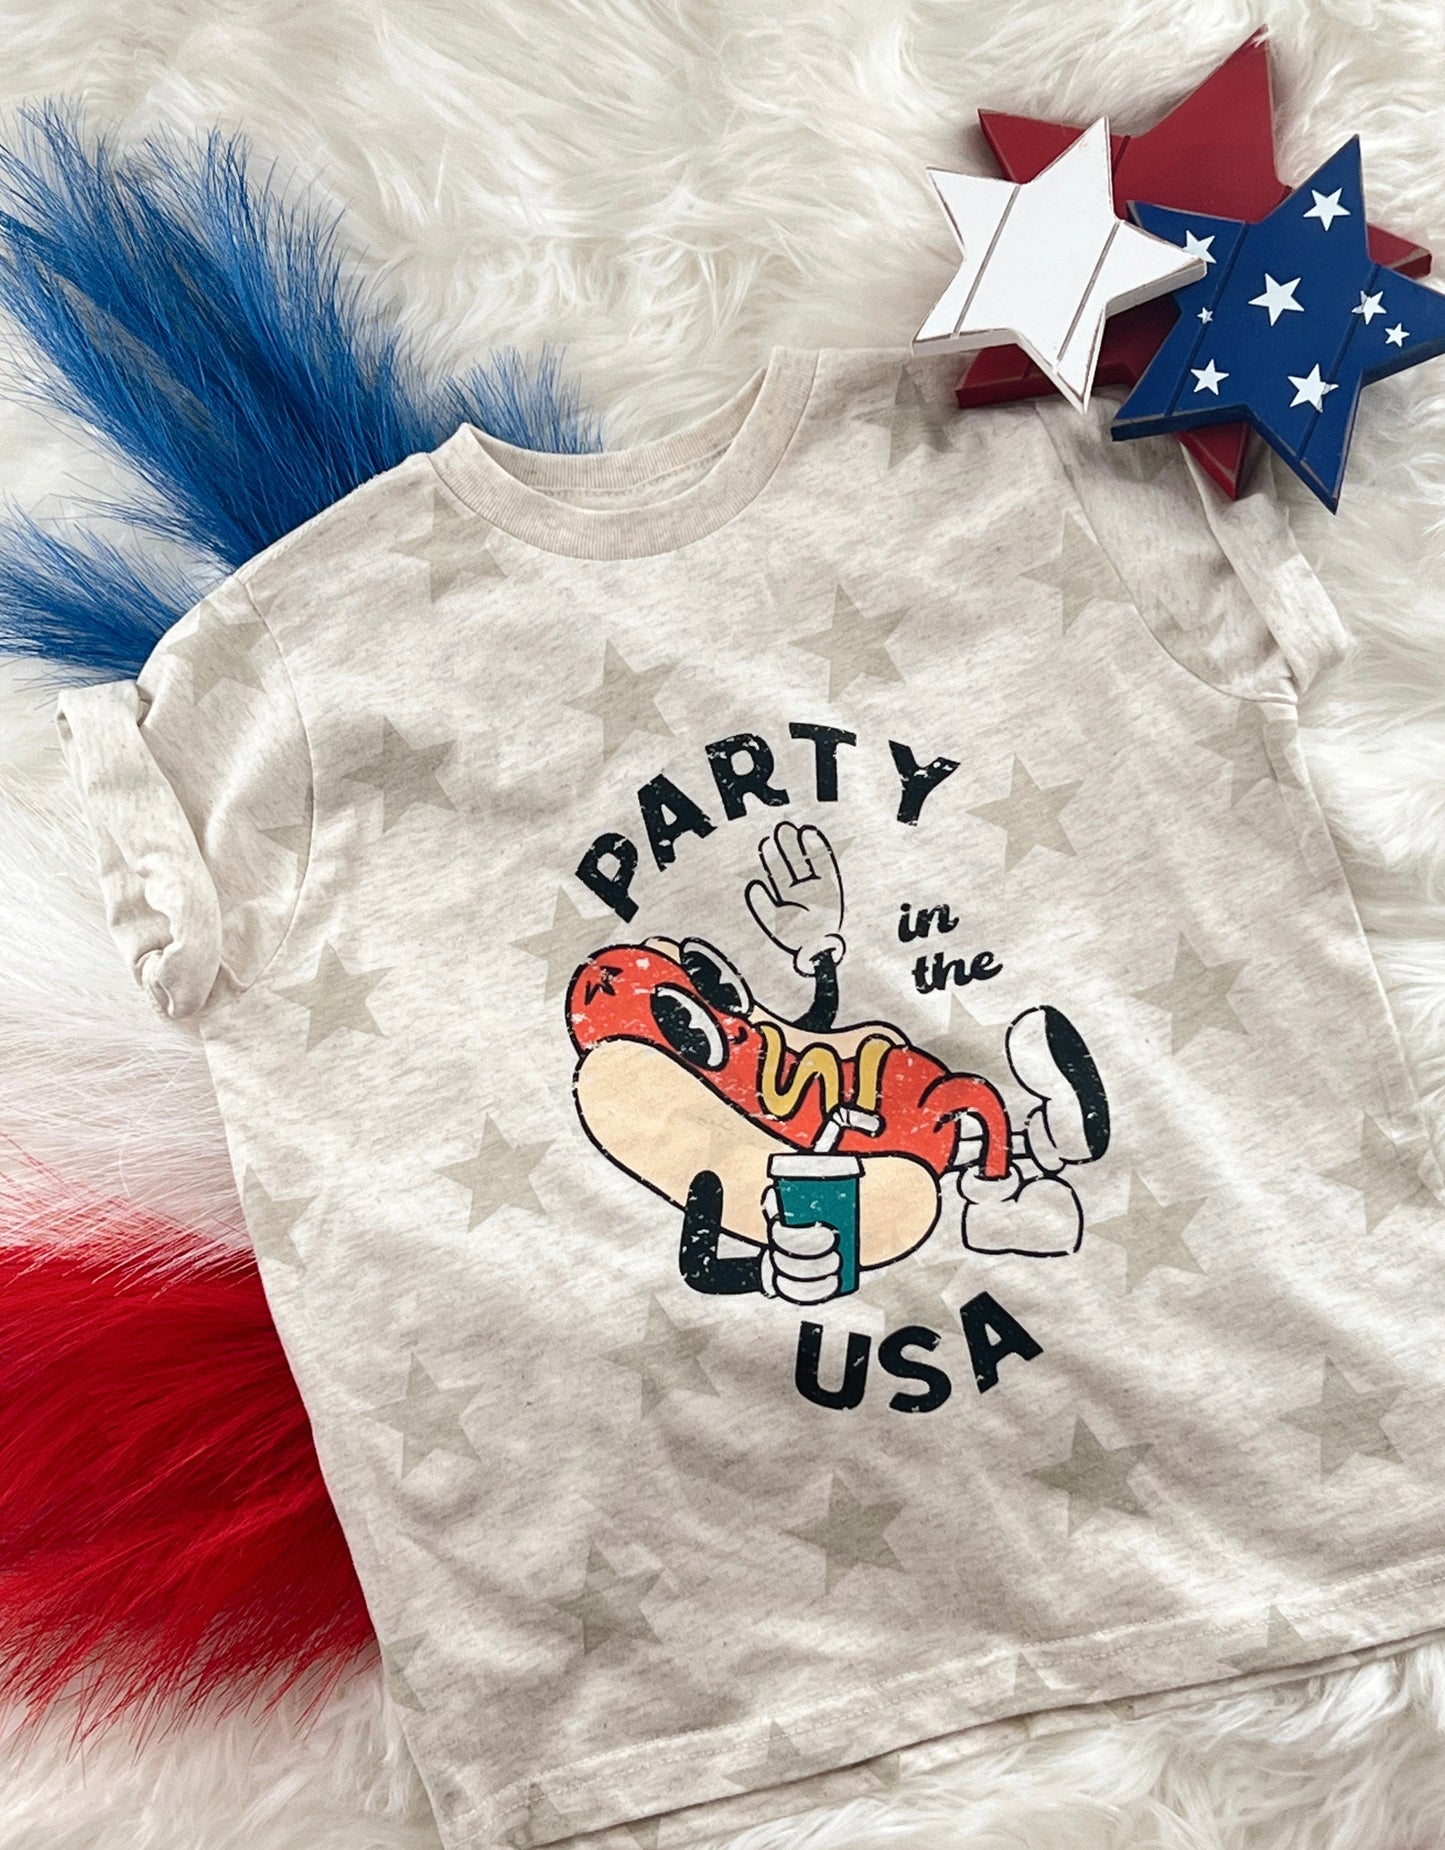 Kids Party in the USA